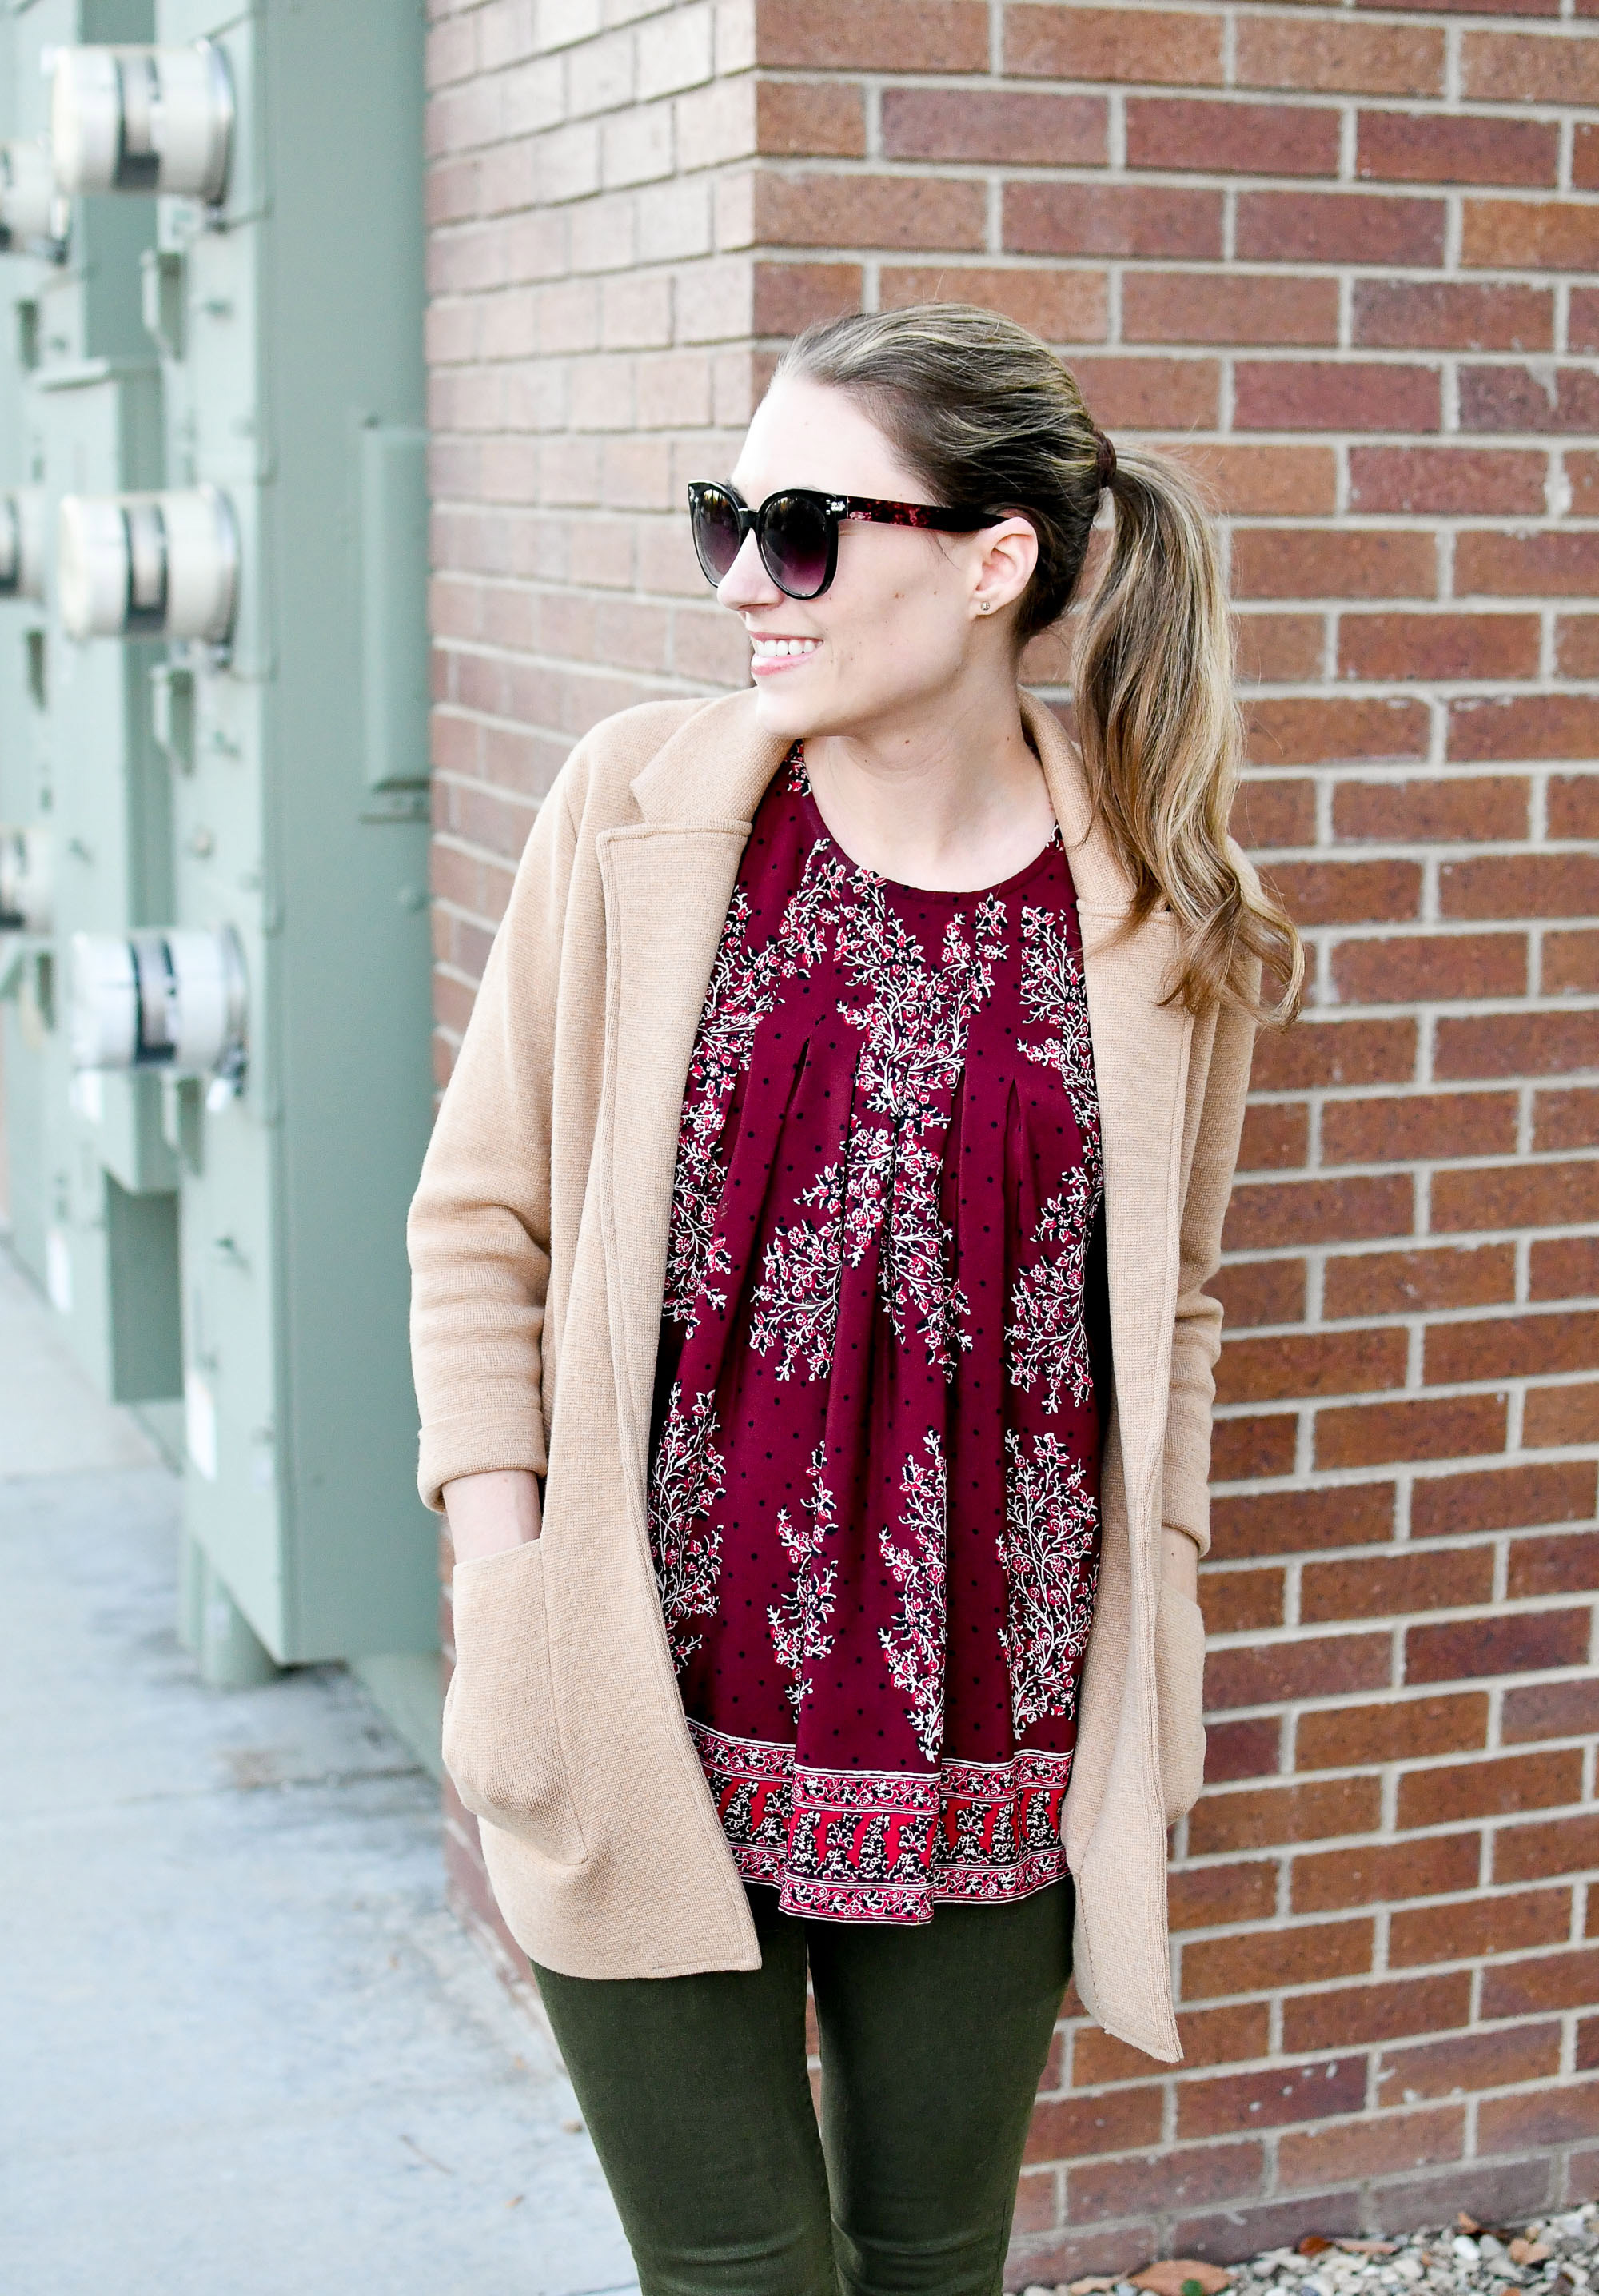 How to wear burgundy and olive together